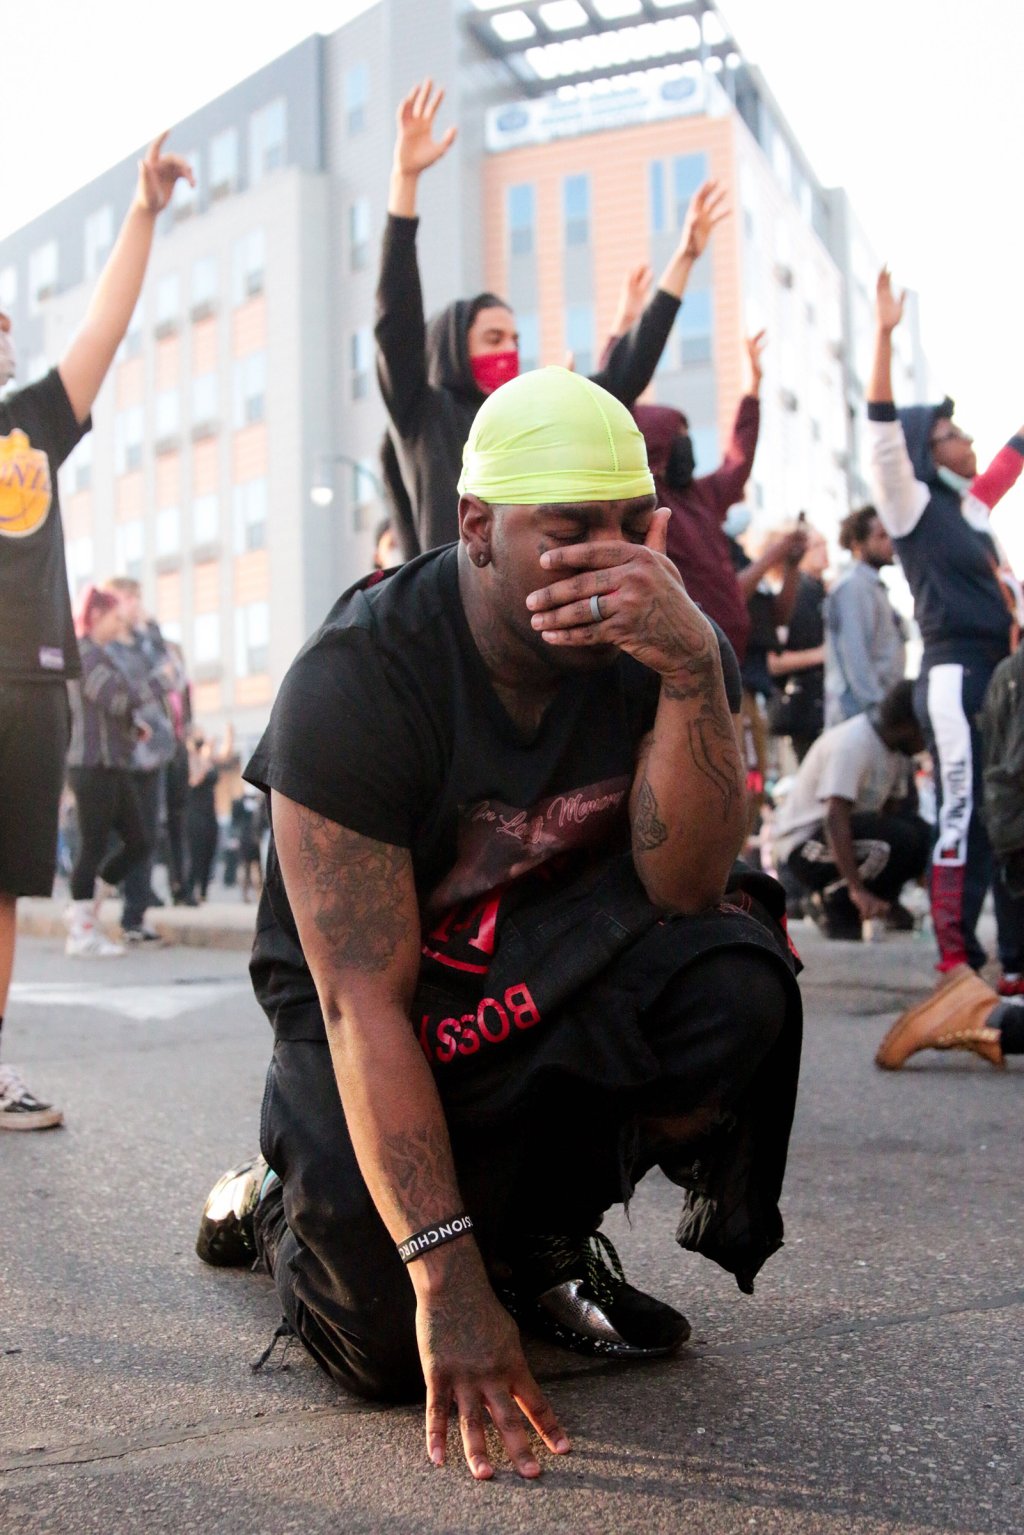 A protester has an emotional moment in Minneapolis on May 29, four days after George Floyd was killed.